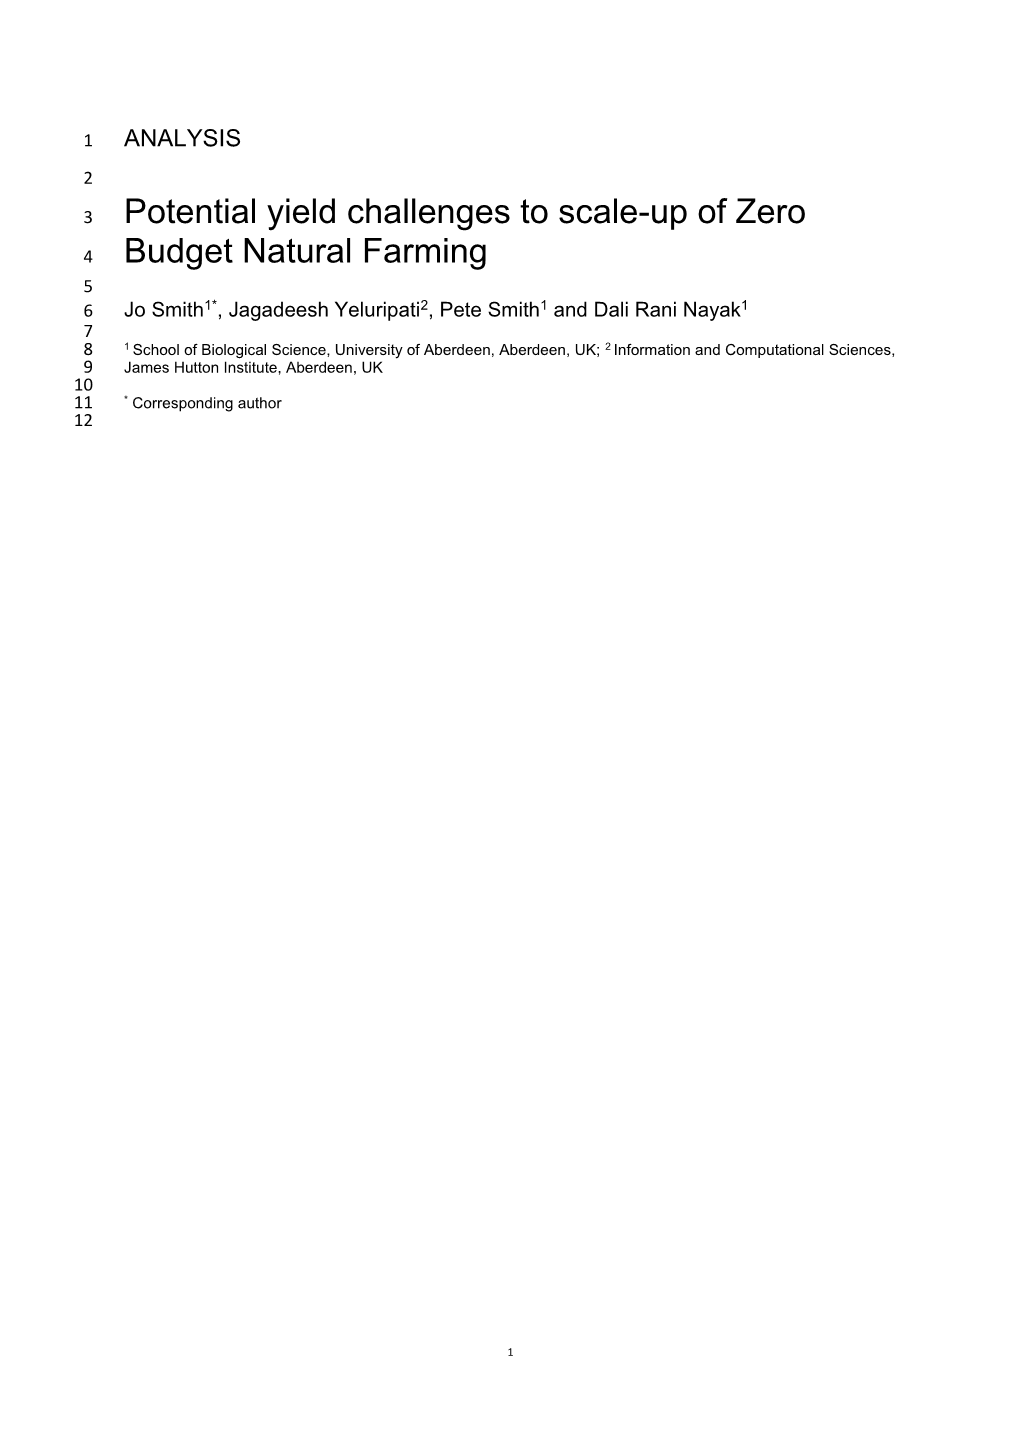 Potential Yield Challenges to Scale-Up of Zero Budget Natural Farming